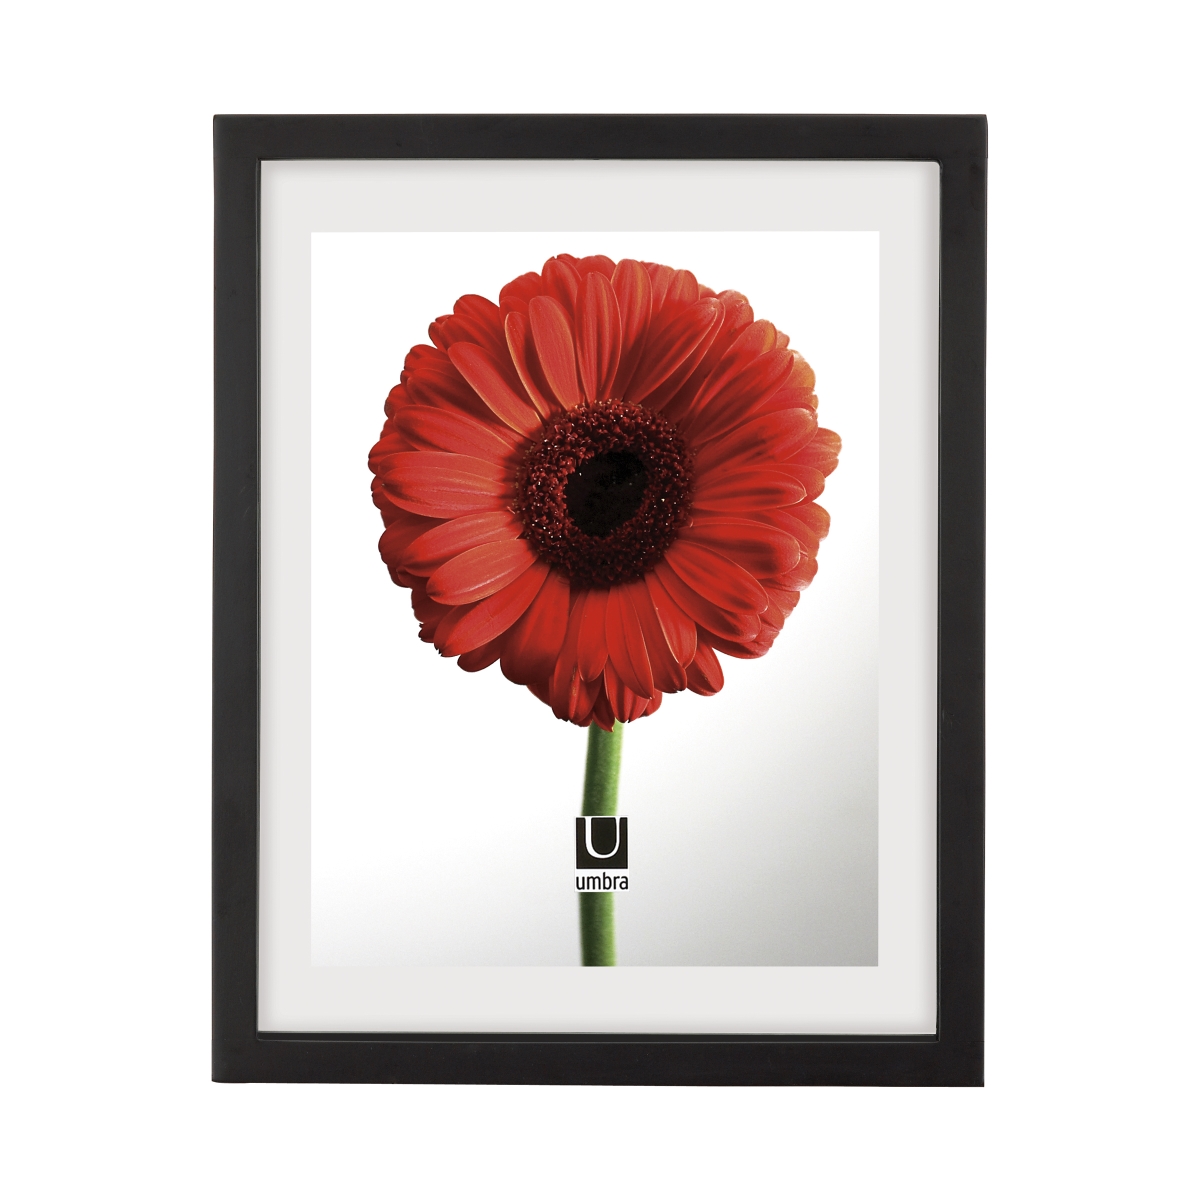 316280-040 11 X 14 In. Modern Document Picture Frame Designed To Display A Floating 8.5 X 11 In. Photo Or Artwork - Black